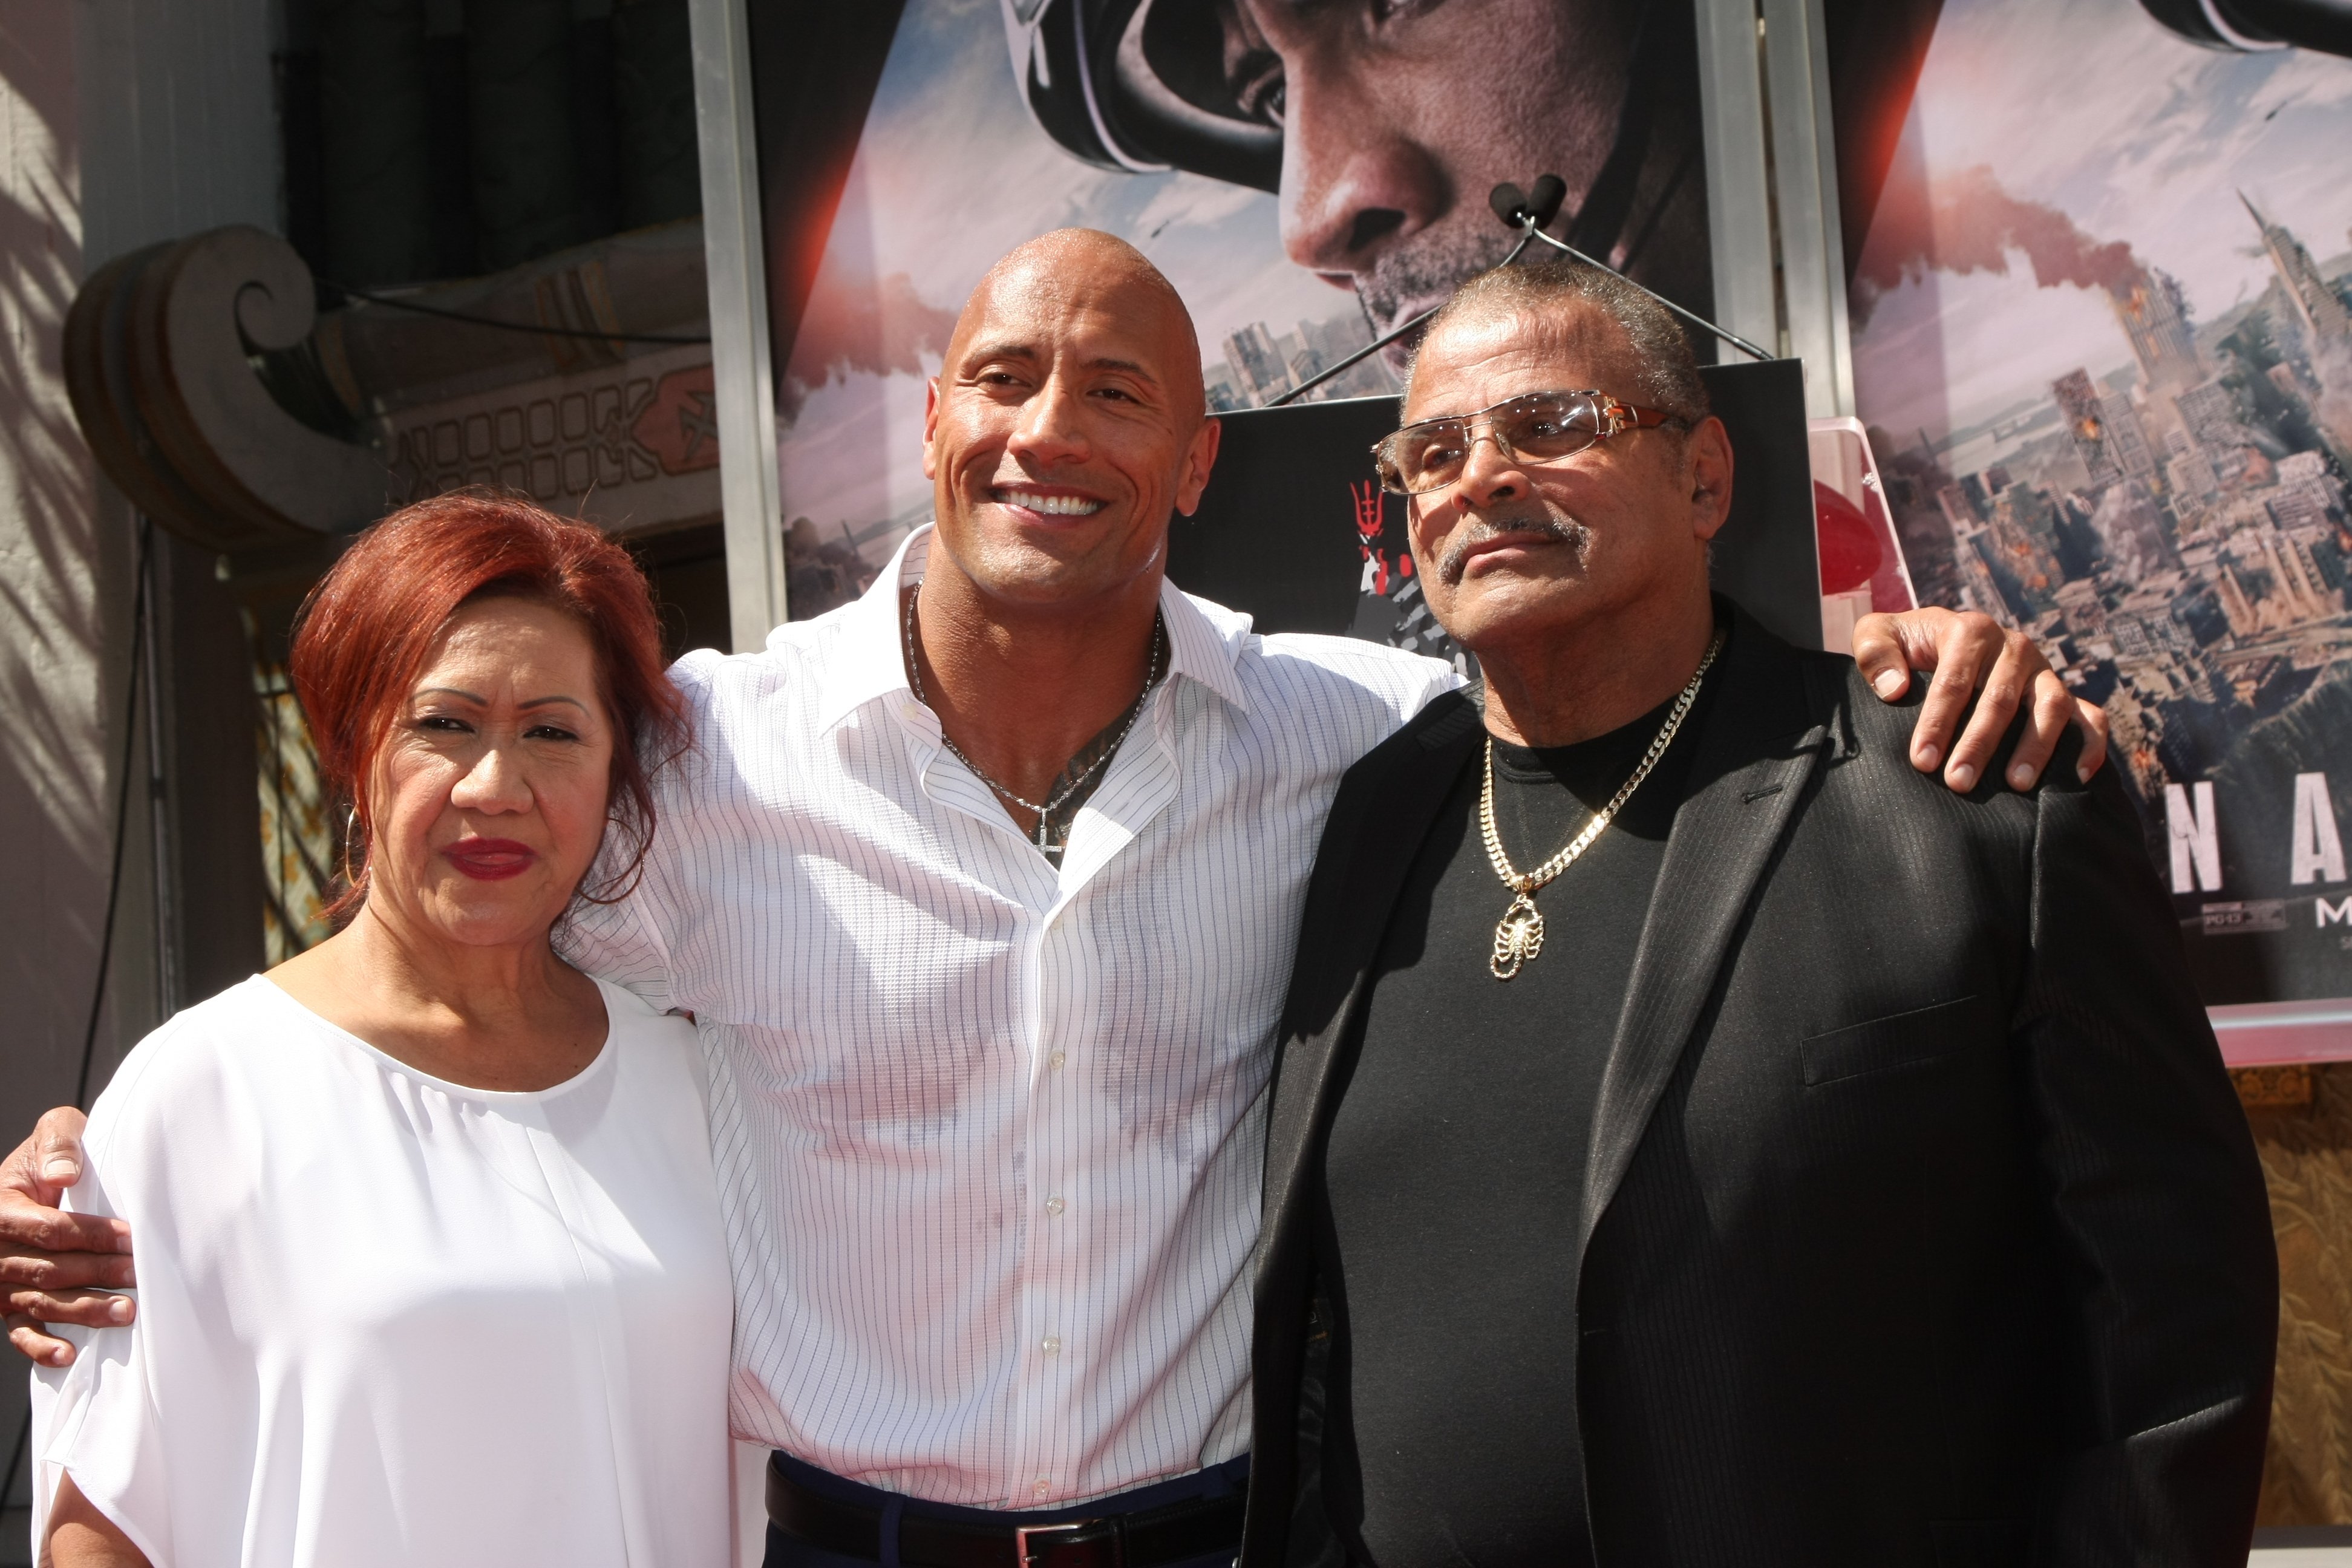 Dwayne Johnson pictured with his mom, Ata Johnson, and dad, Rocky Johnson, at his Hand and Foot Print Ceremony at the TCL Chinese Theater, 2015. California | Photo: Shutterstock